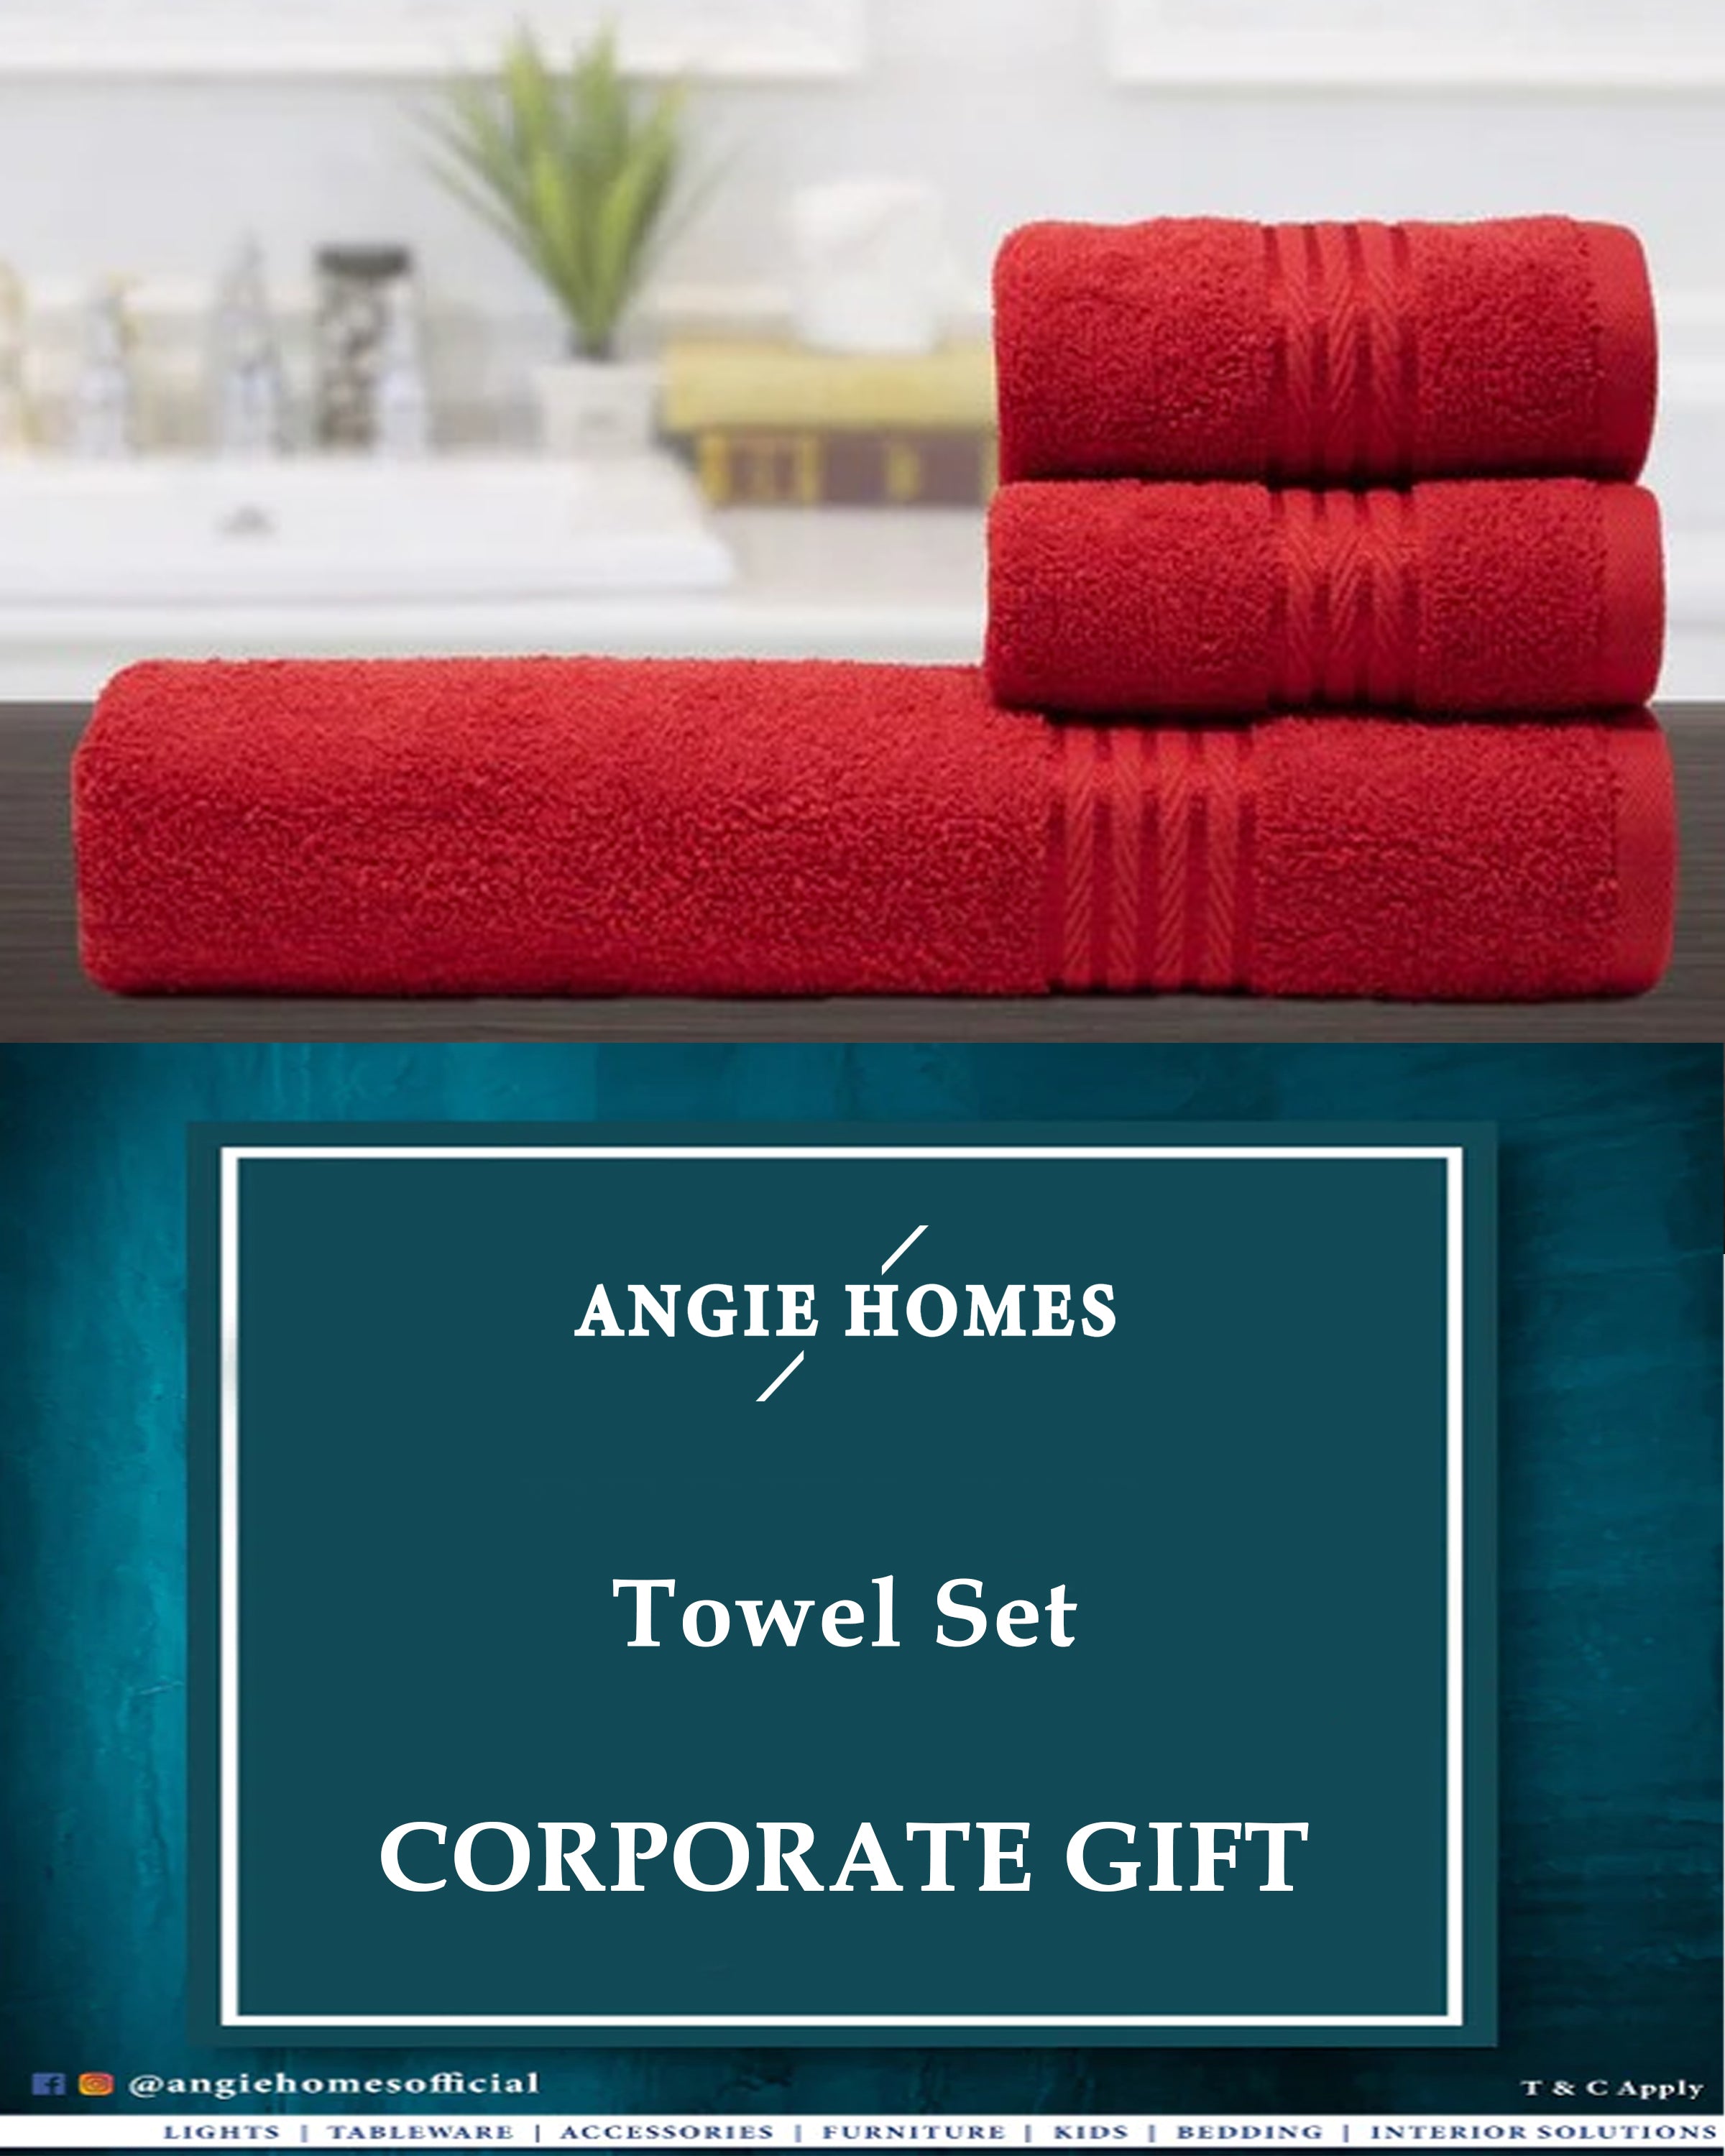 Towel Set for Wedding, House Warming & Corporate Gift ANGIE HOMES